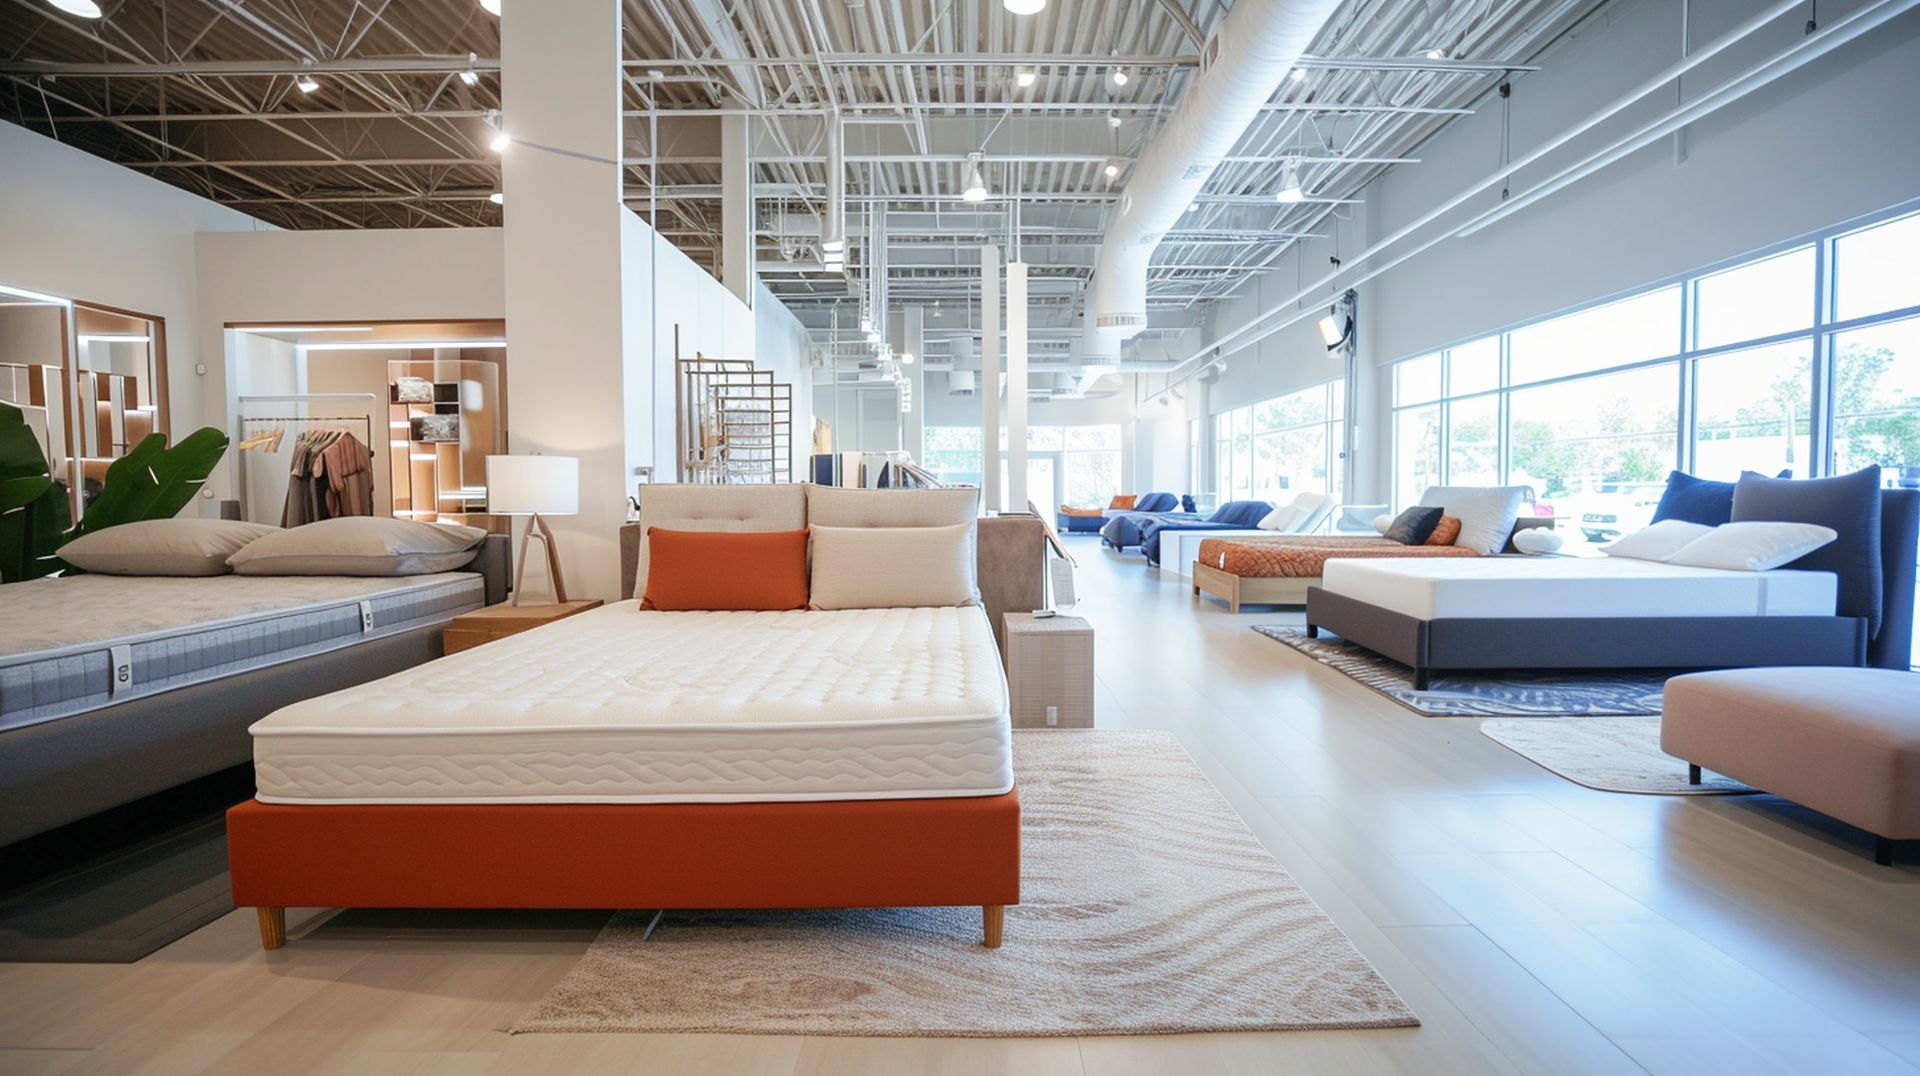 Local Richmond mattress stores have the best prices, sales, and deals if you're looking for a new mattress in Richmond